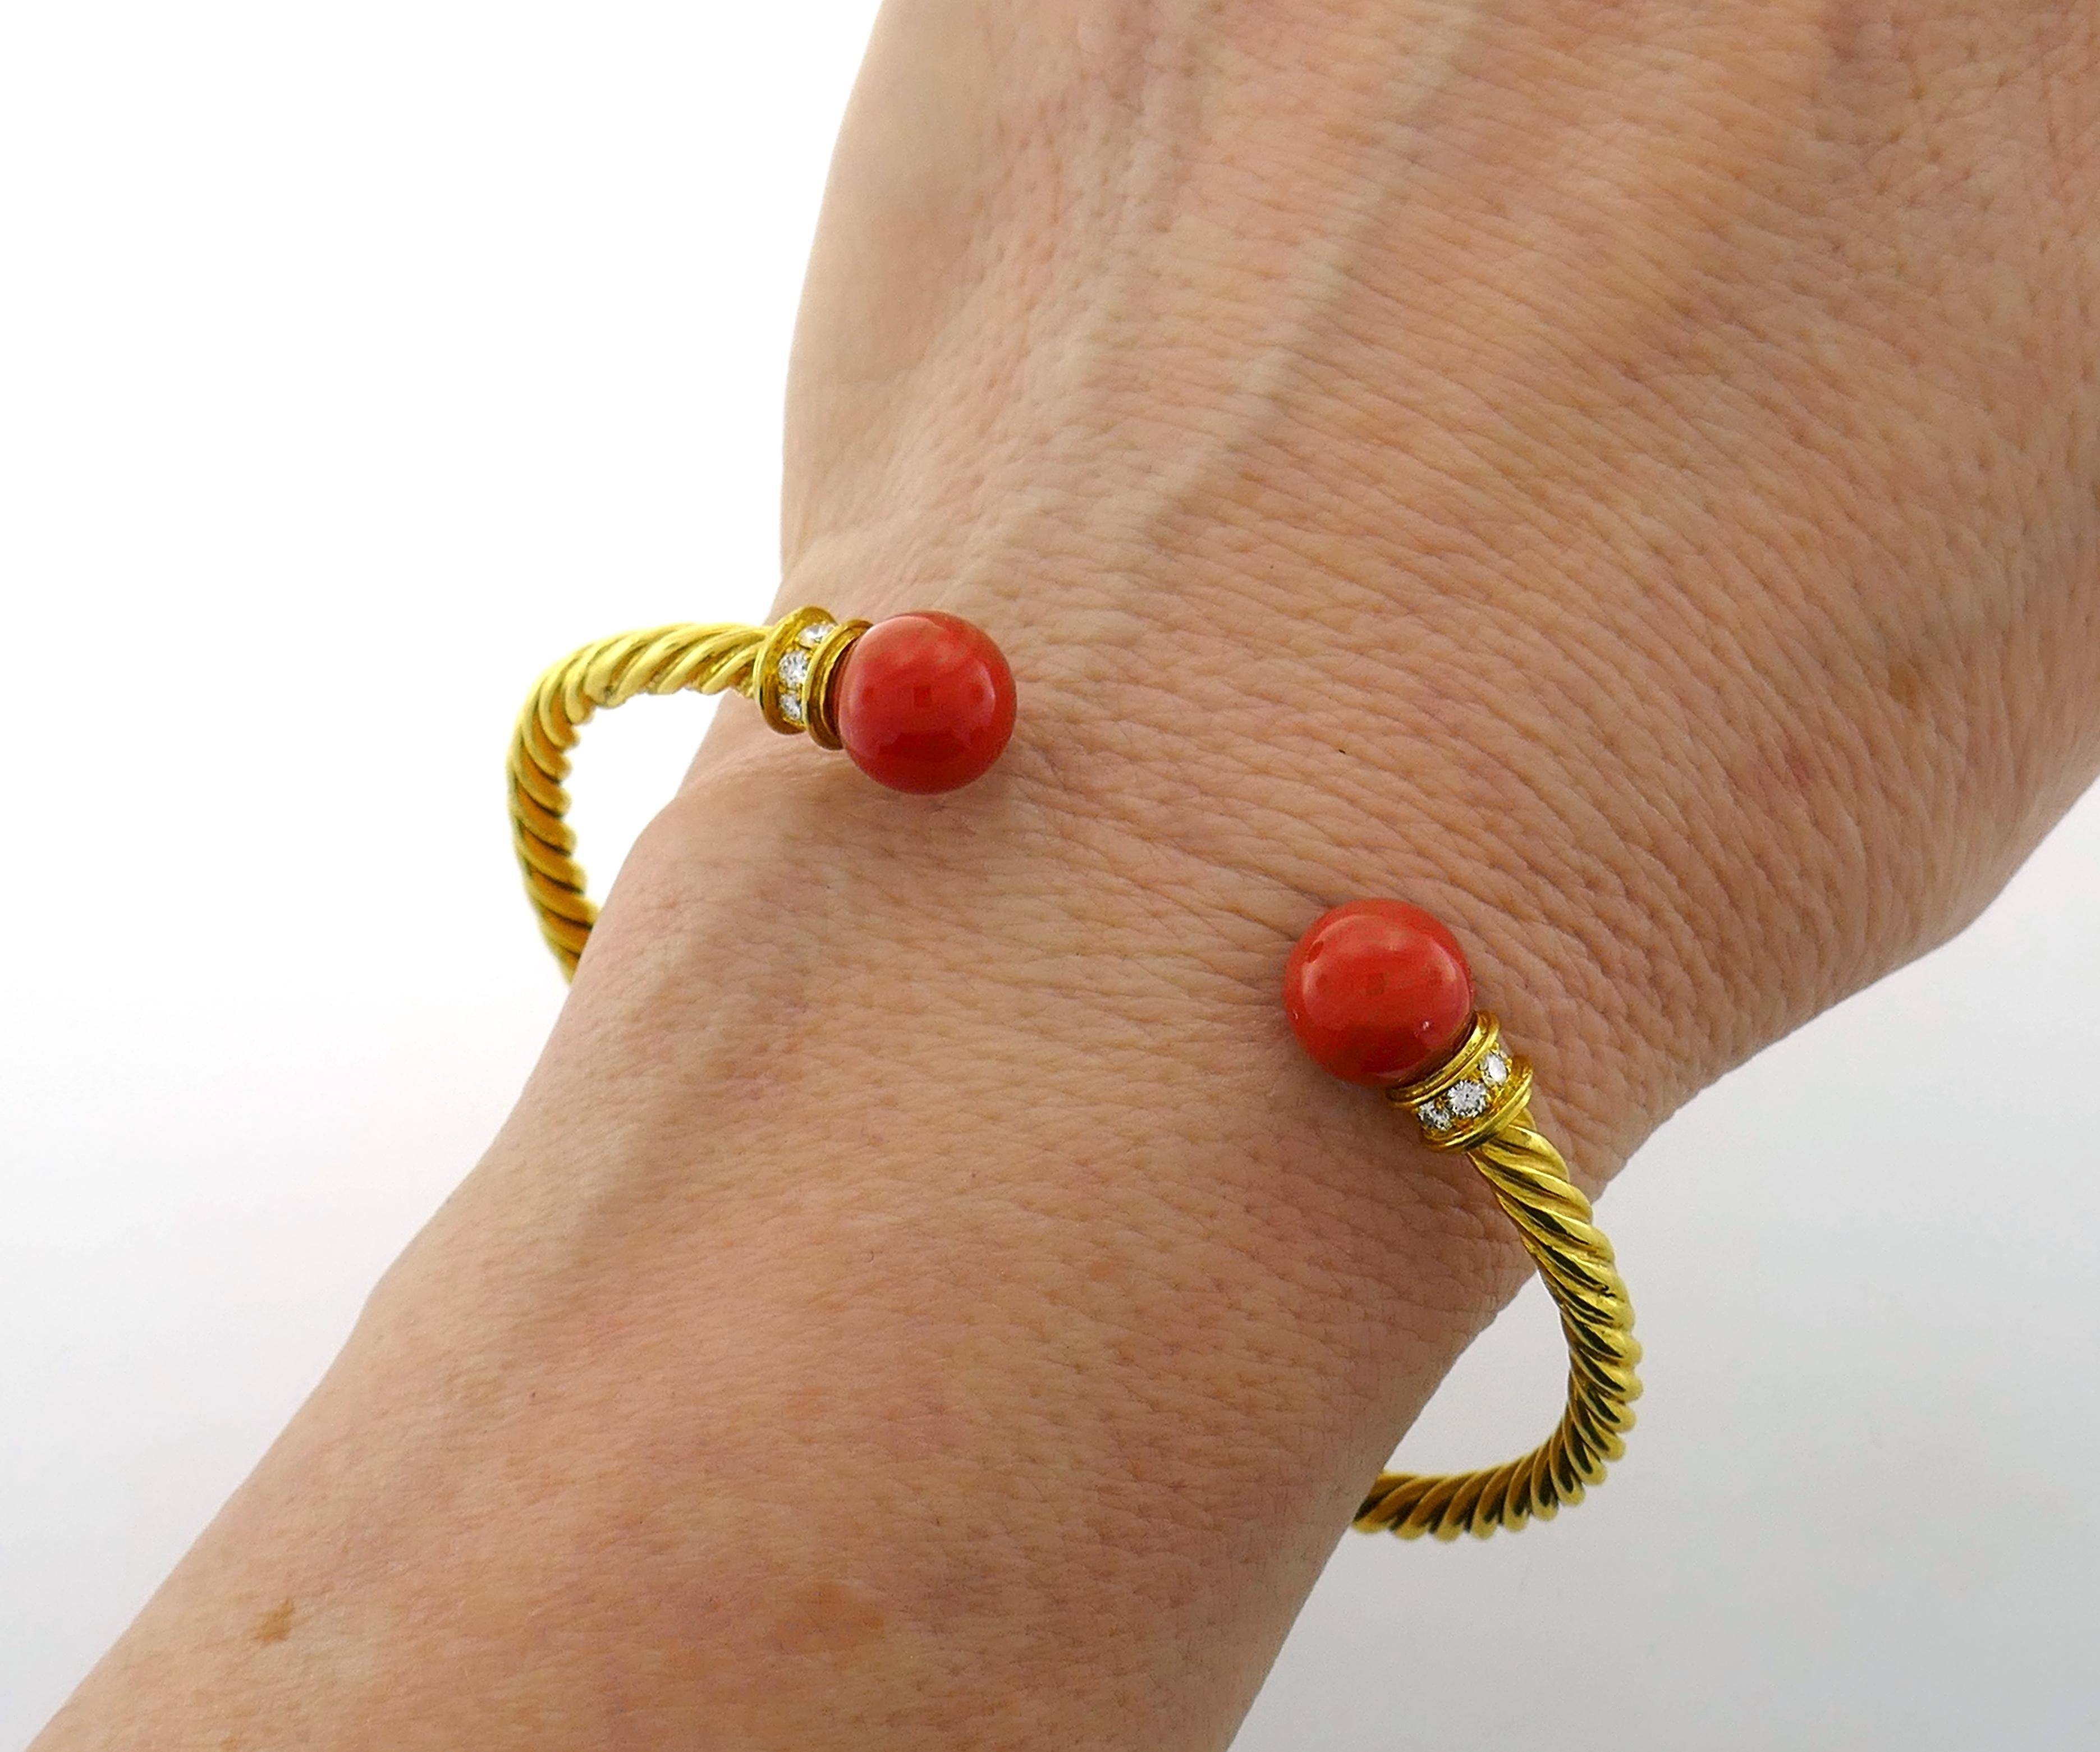 Light, summery chic bracelet created by Bulgari in Italy in the 1970s. Feminine and wearable, the bangle is a great addition to your jewelry collection. 
Made of 18 karat yellow gold and Mediterranean coral and accented with round brilliant cut